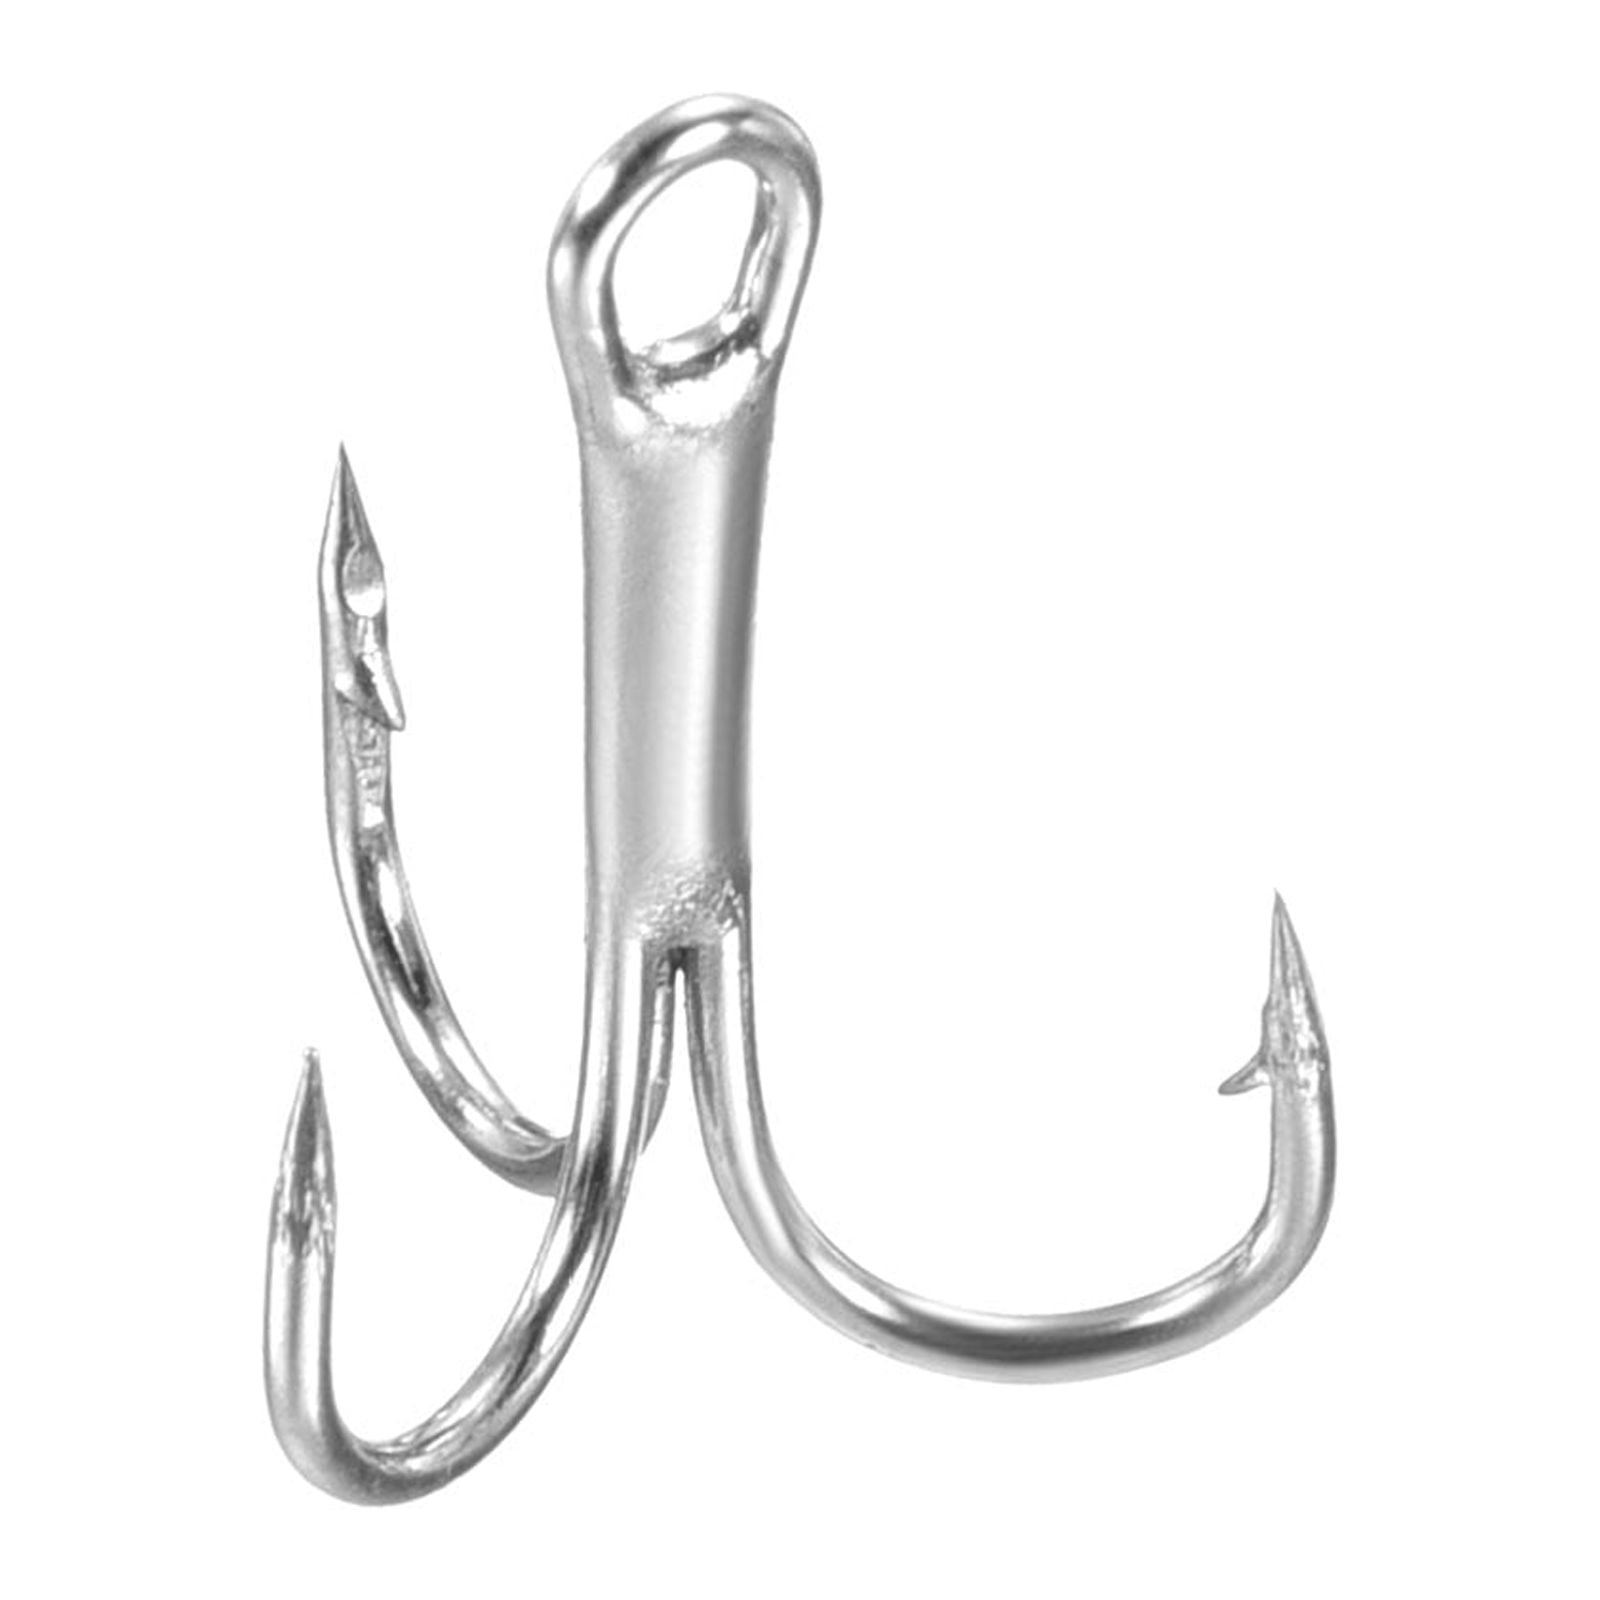 12# 0.51 Treble Fish Hooks Carbon Steel Sharp Bend Hook with Barbs, White  50 Pack